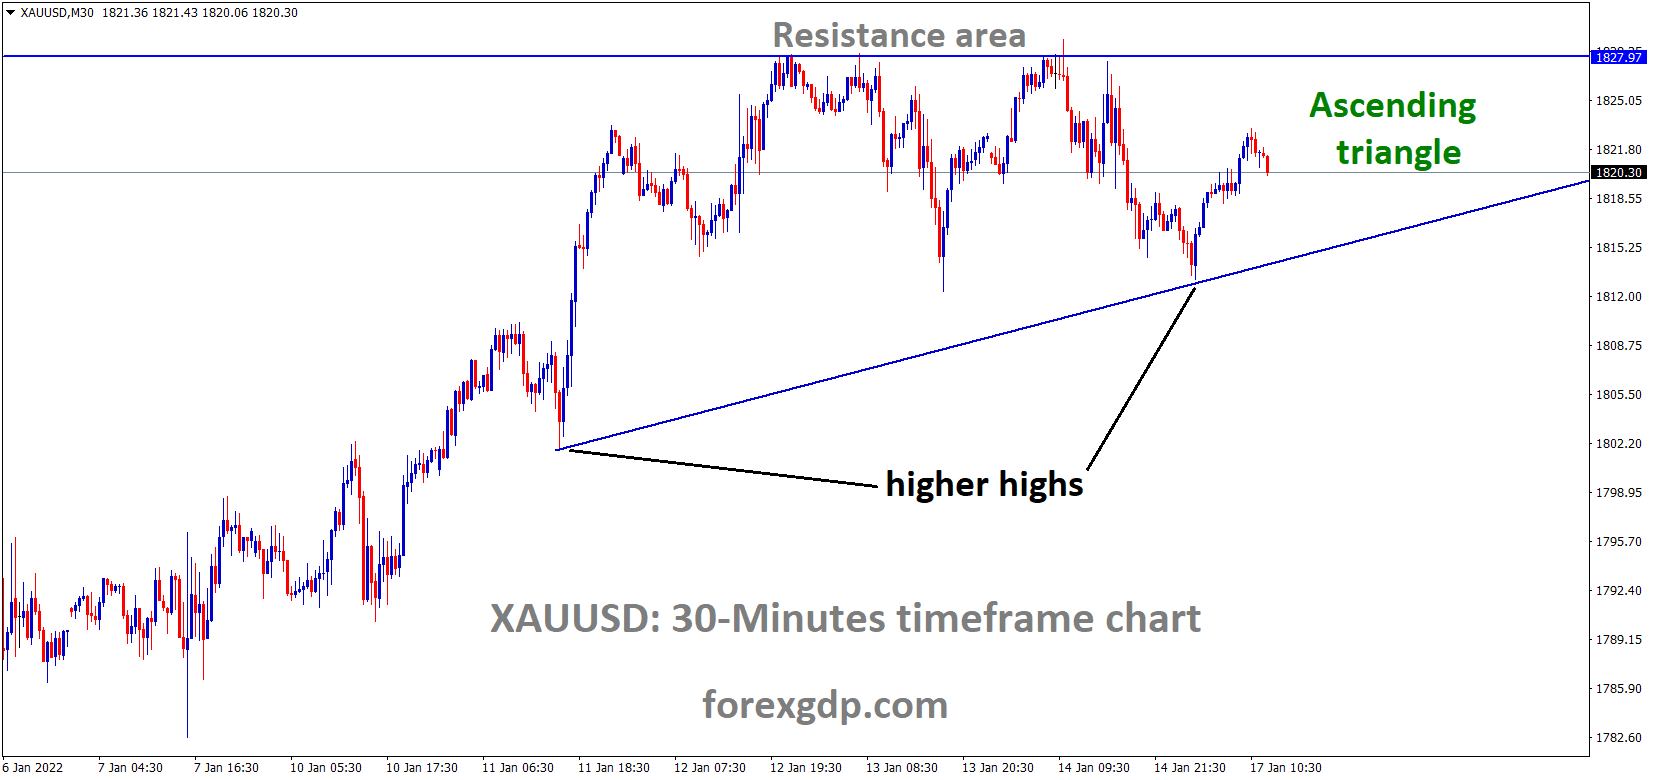 XAUUSD Gold price is moving in an ascending triangle pattern and the market has rebounded from the higher low area of the triangle pattern.